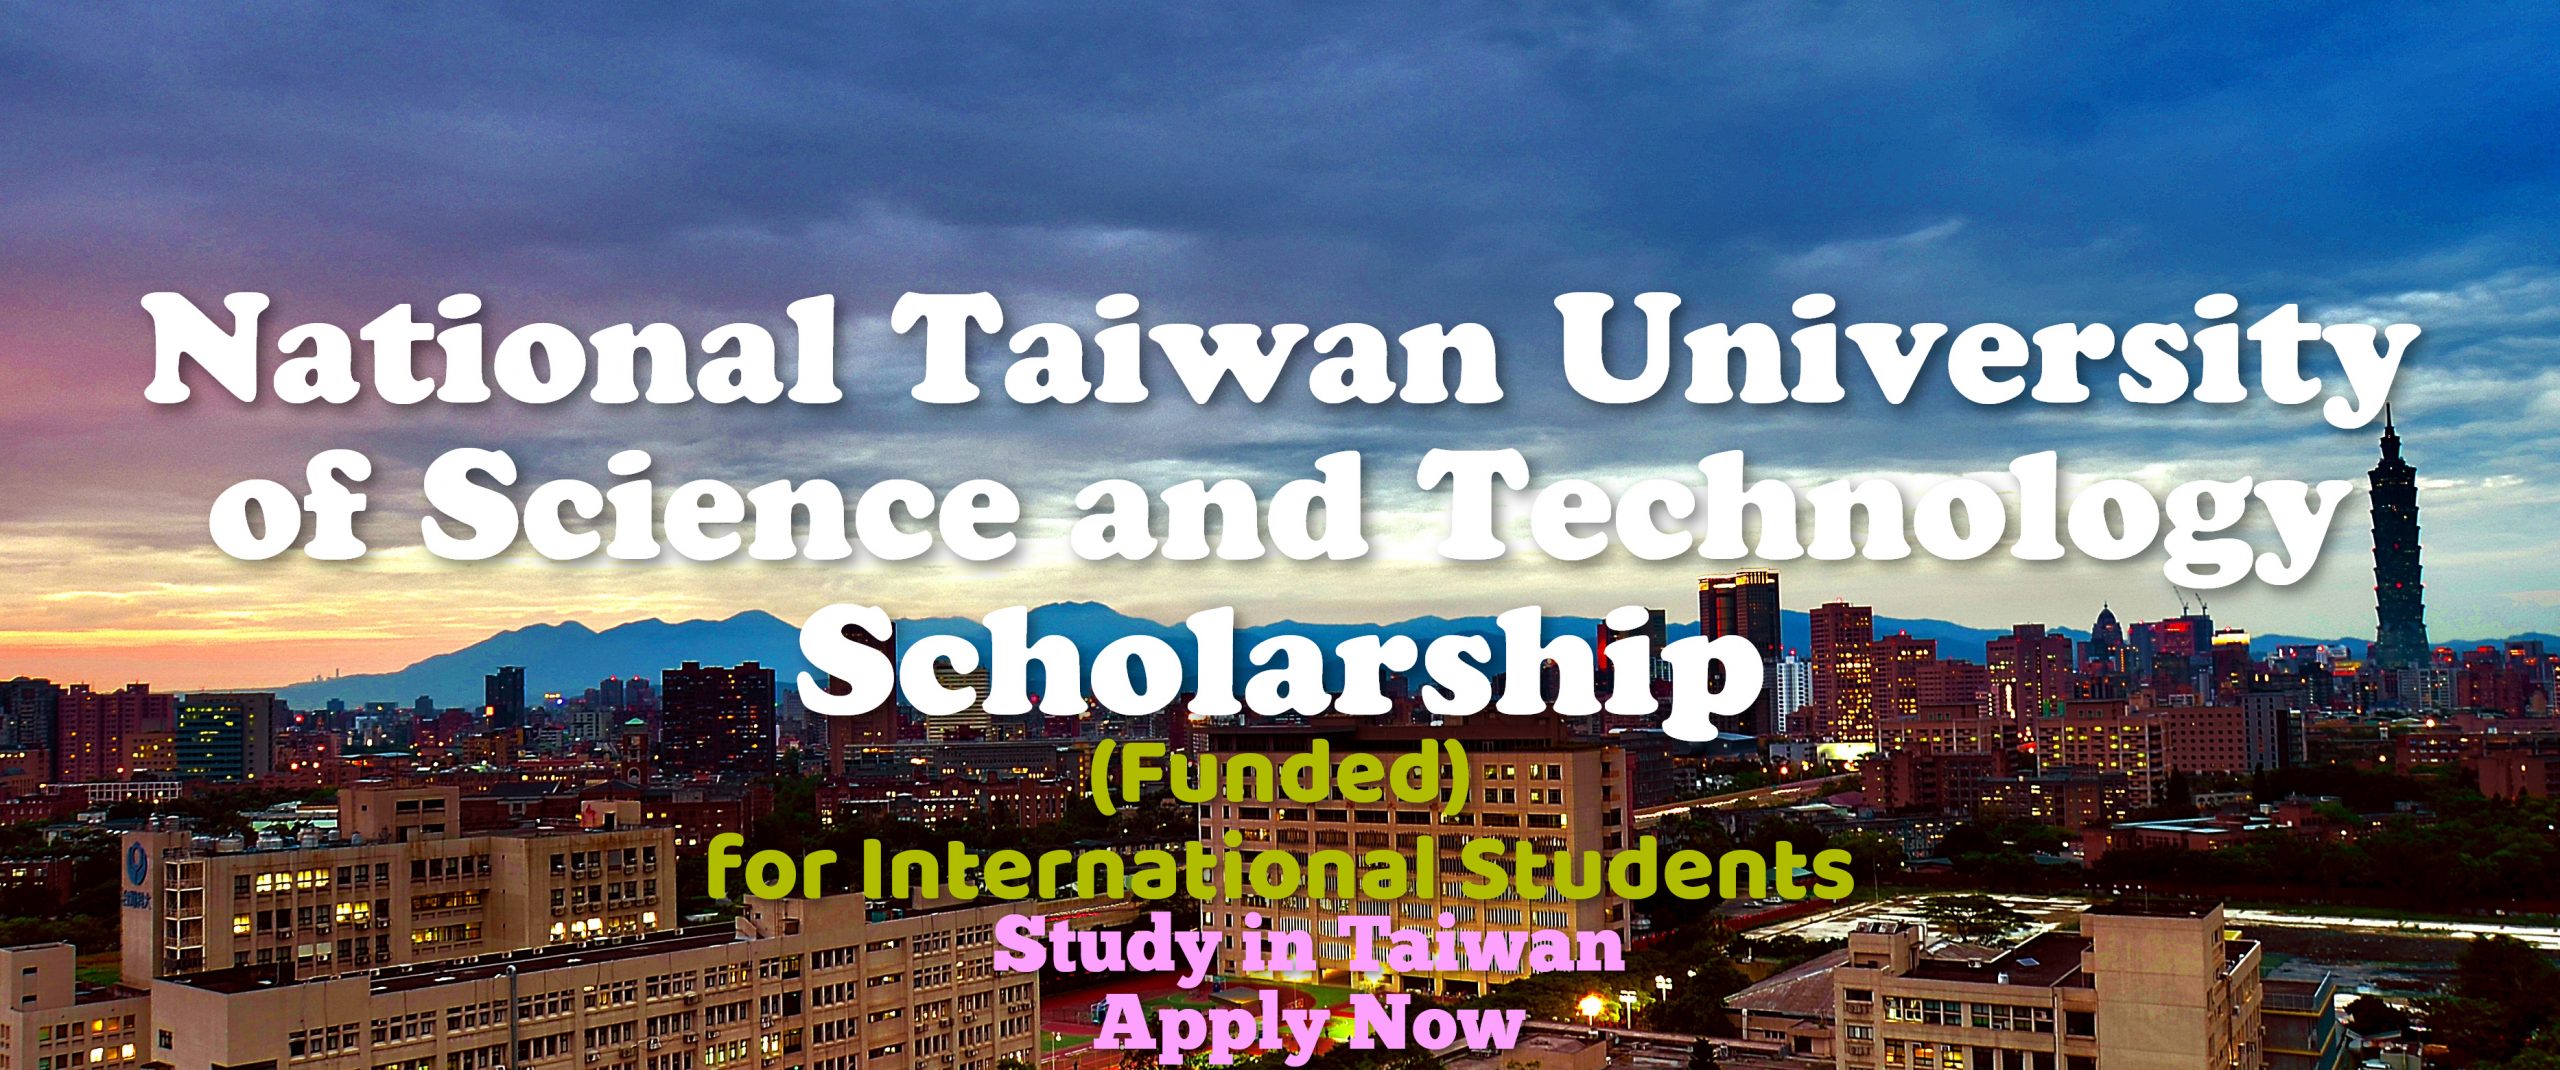 National Taiwan University of Science and Technology Scholarship